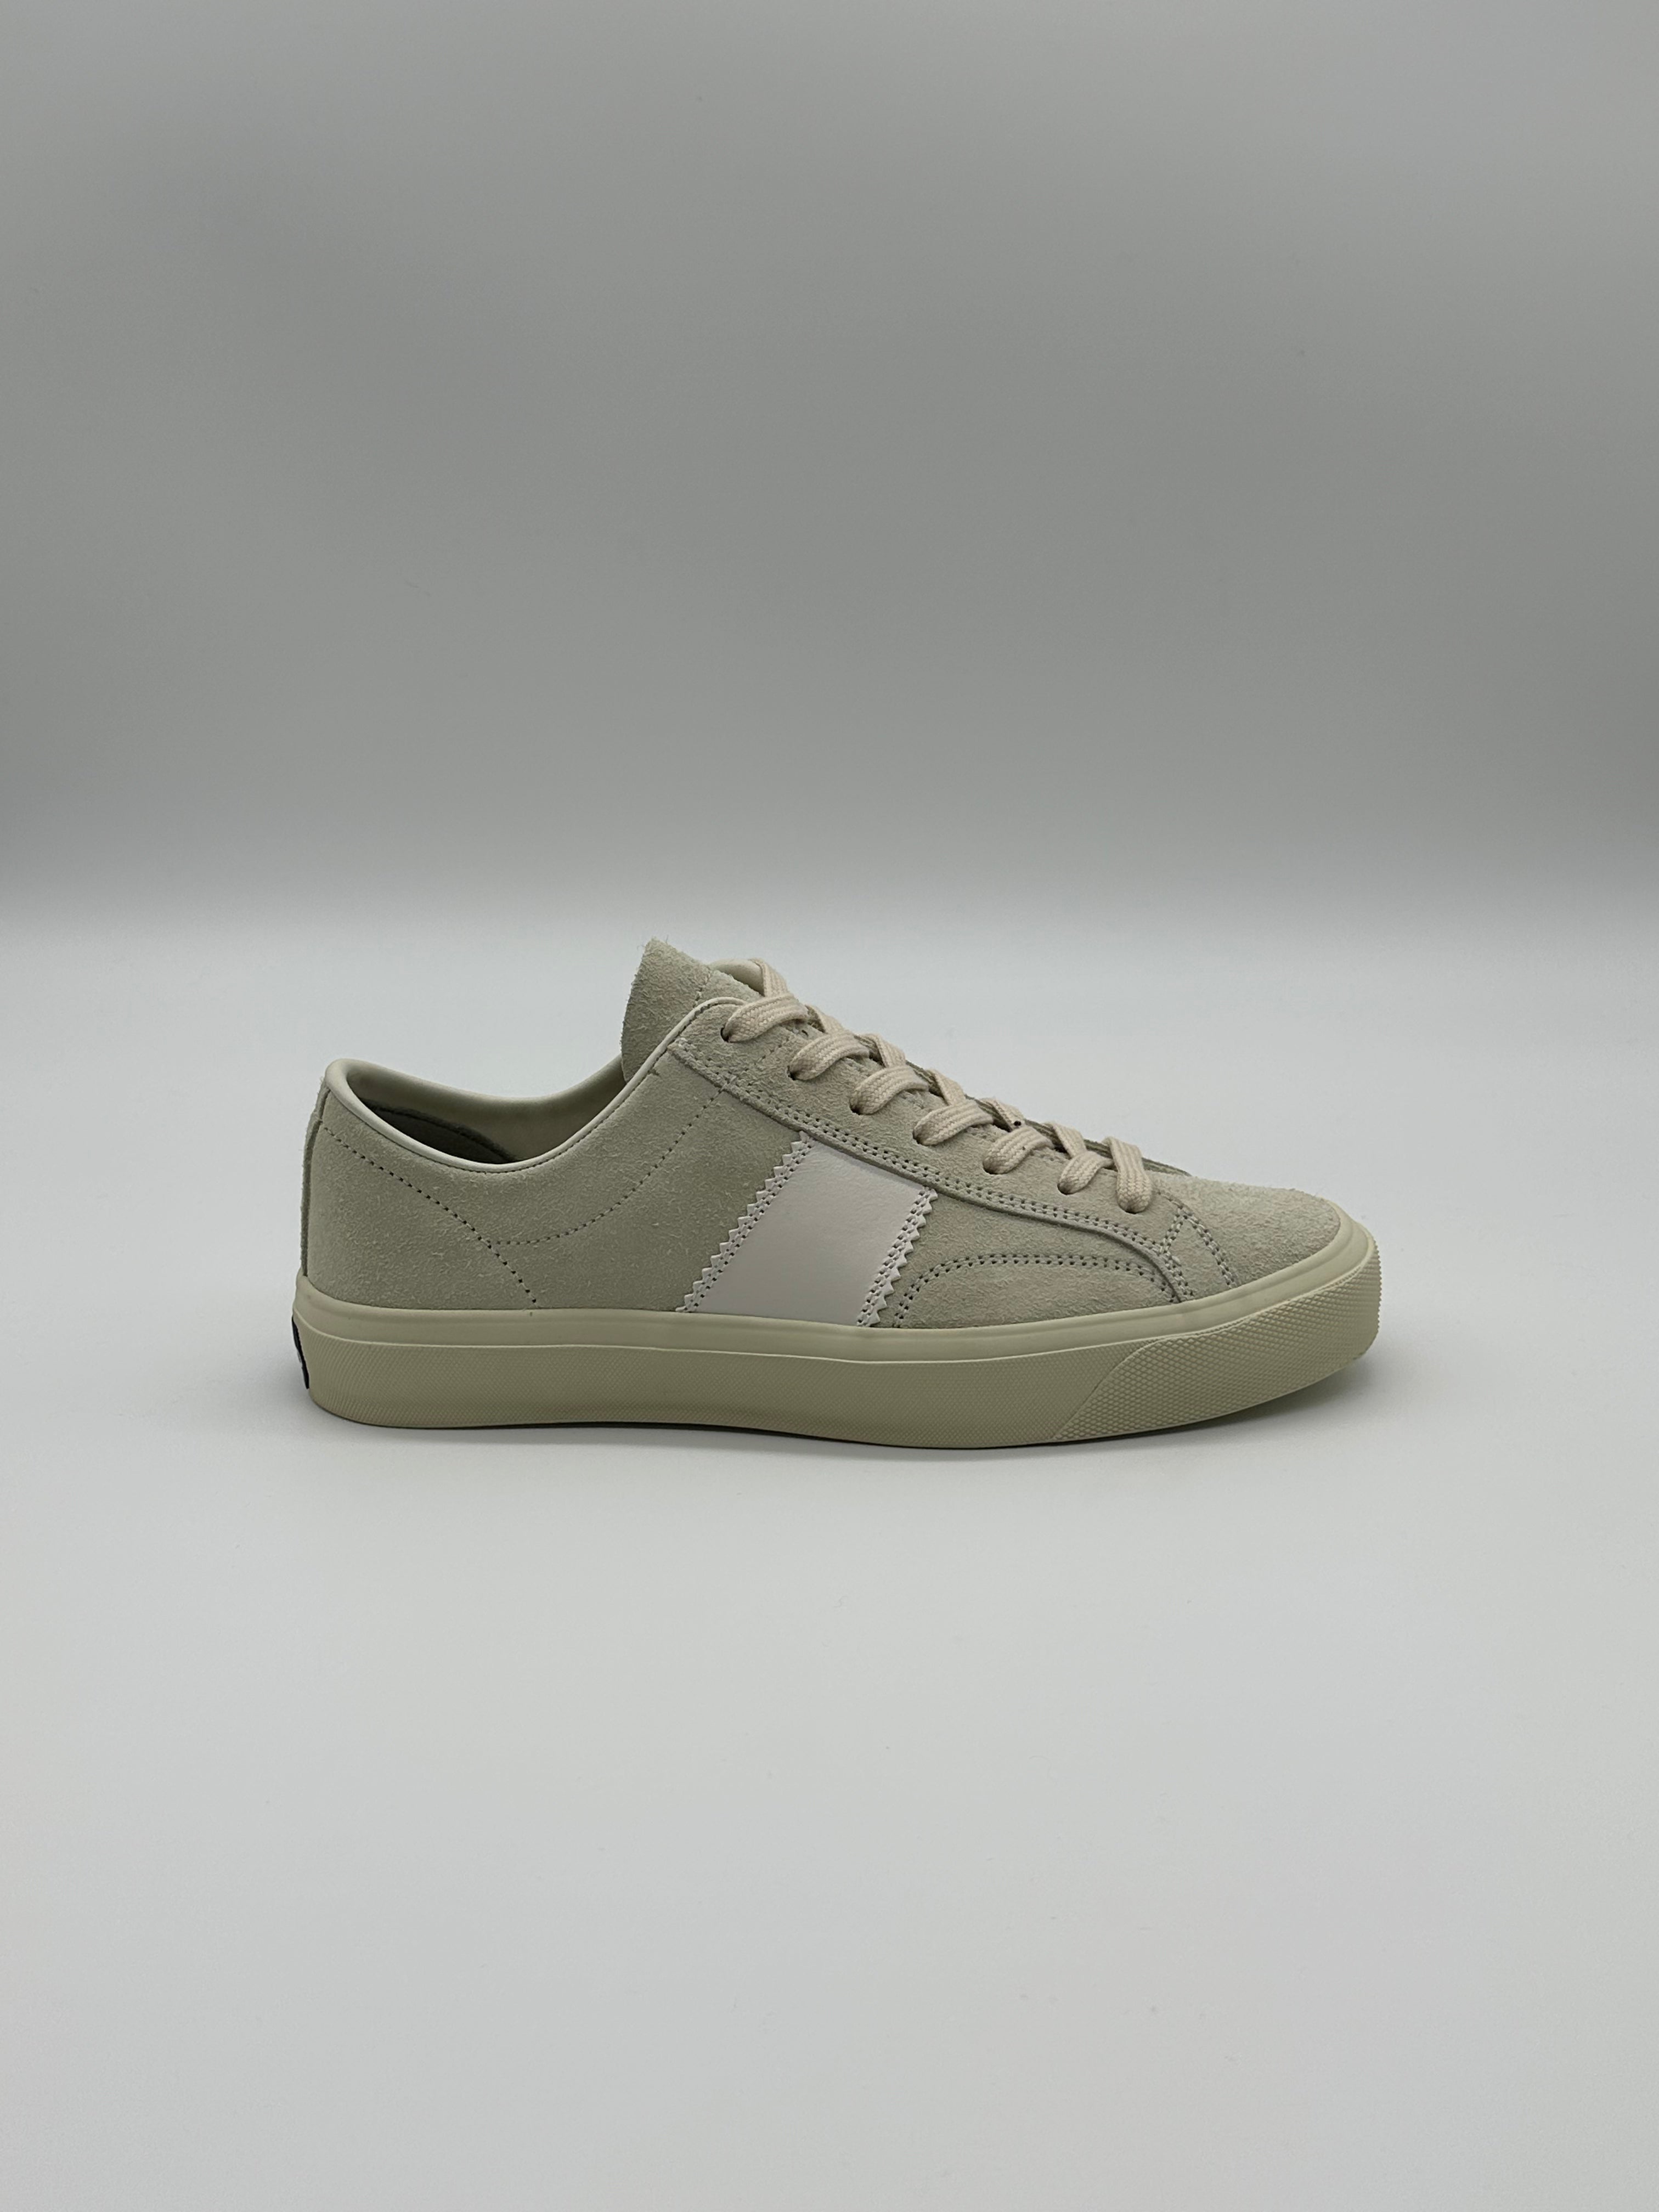 Tom Ford Suede Sneakers